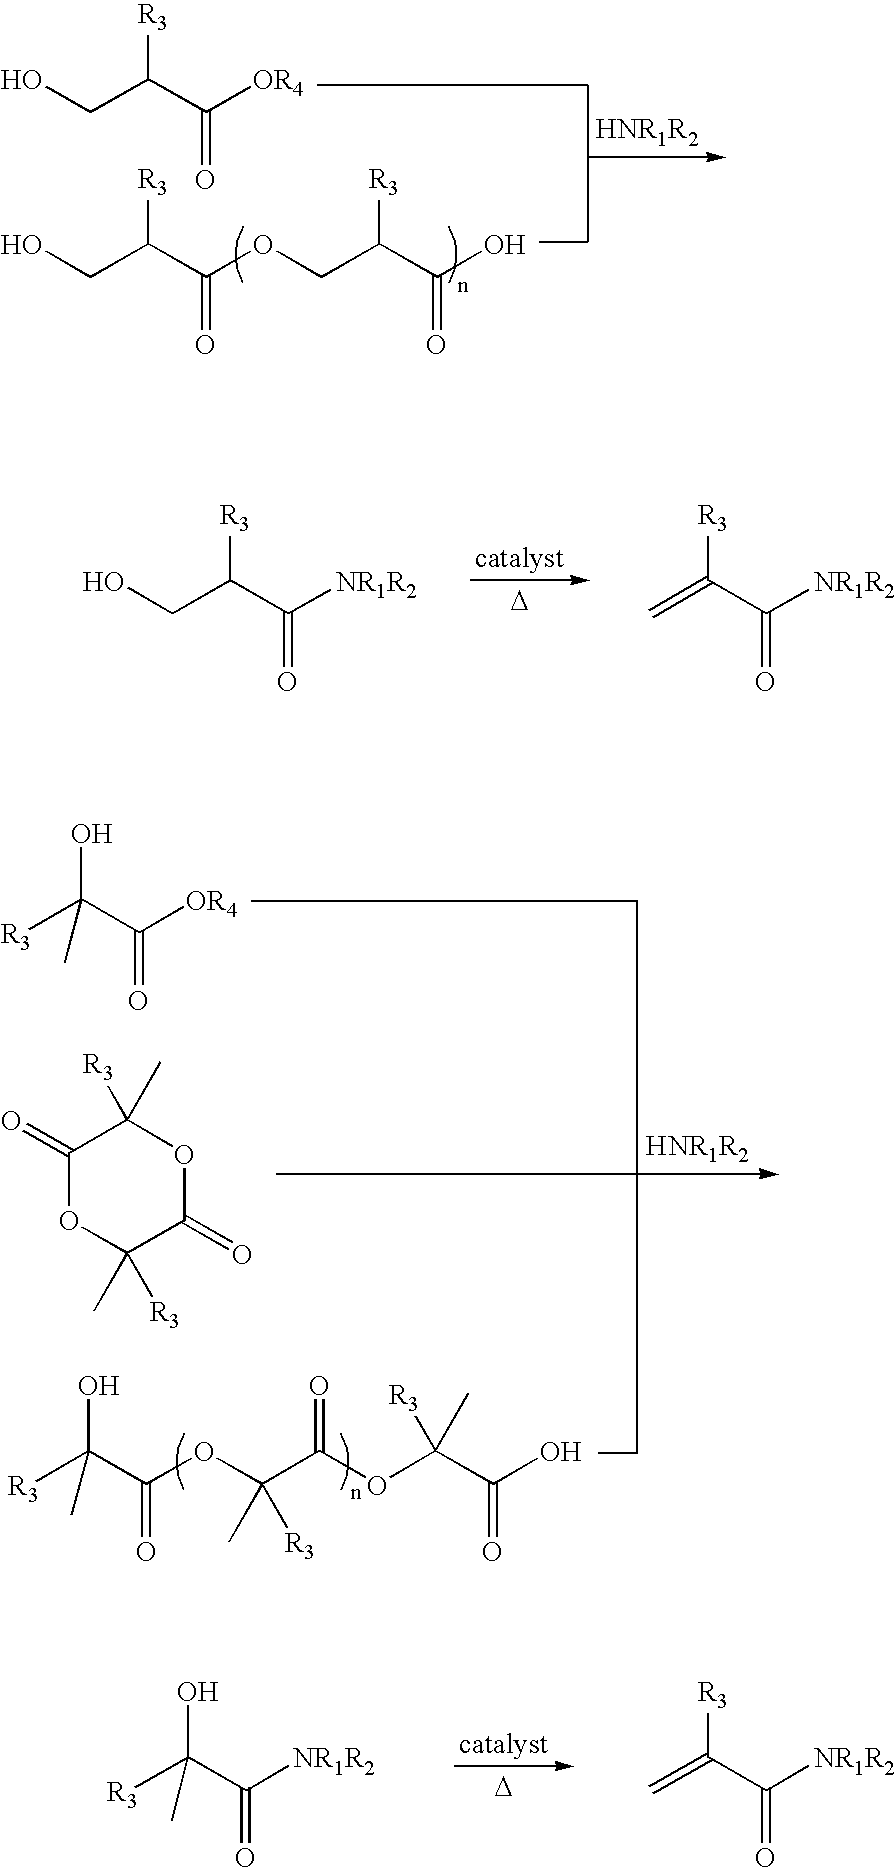 Preparation of acrylic acid derivatives from alpha- or beta-hydroxy carboxylic acids